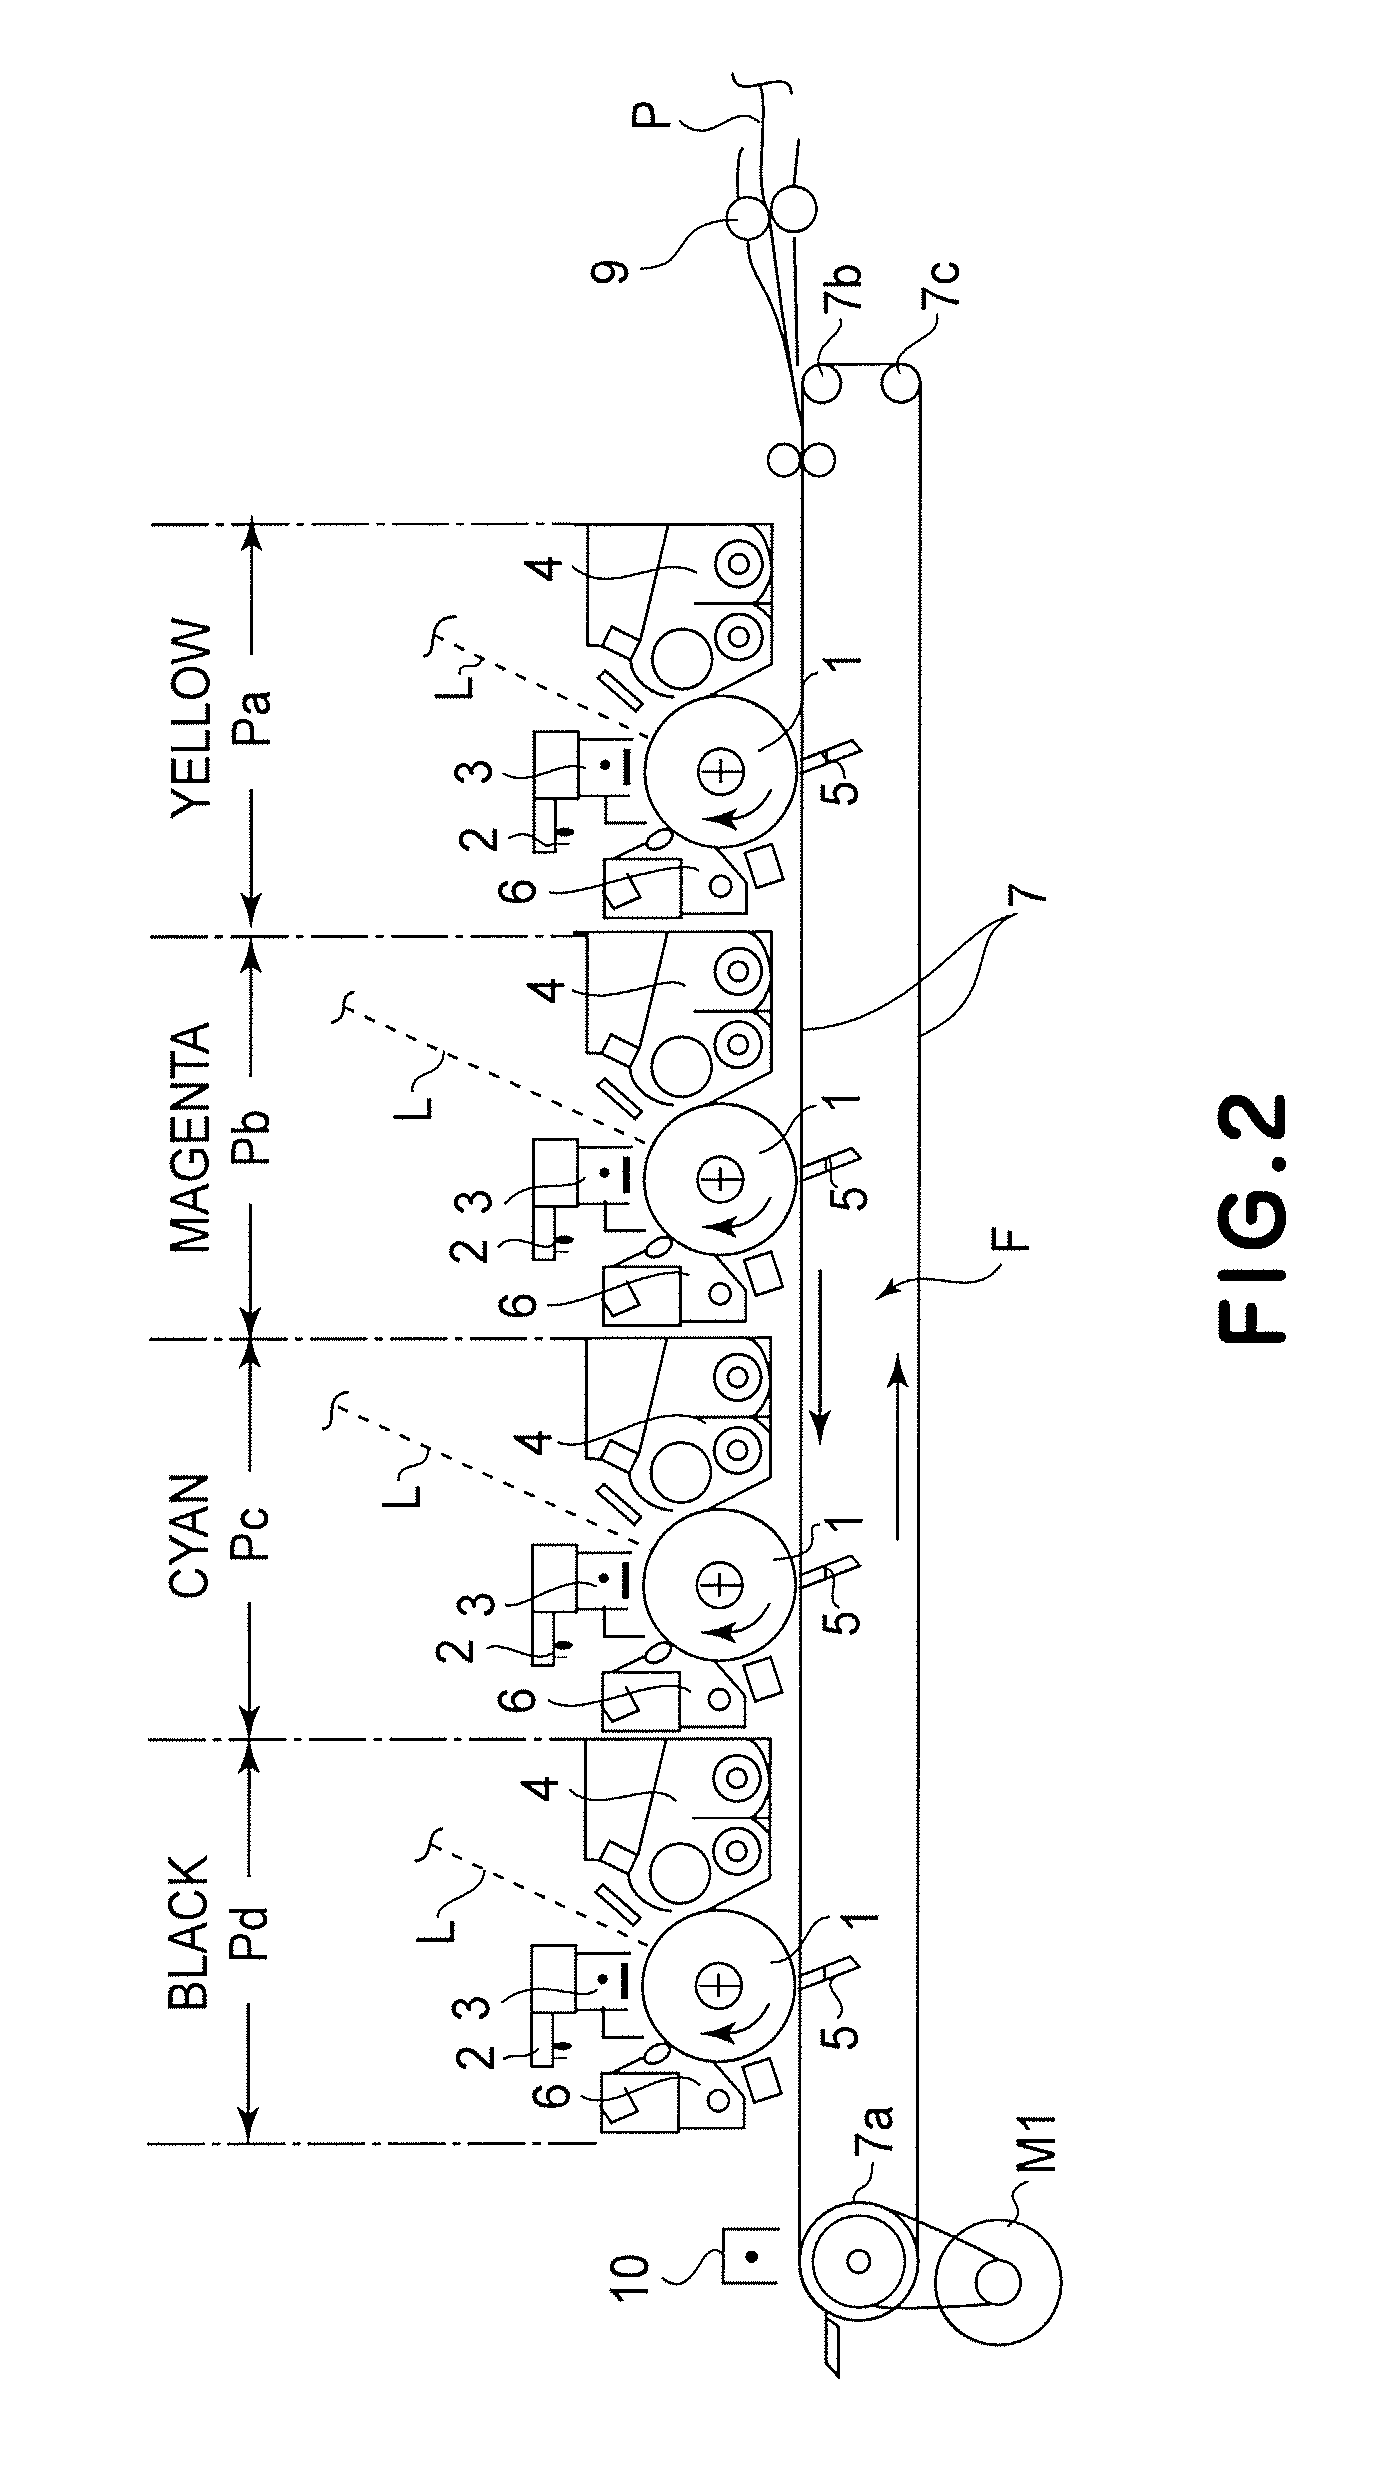 Image forming apparatus and method with control of image heating condition based on desired glossiness difference between achromatic image portion and color image portion